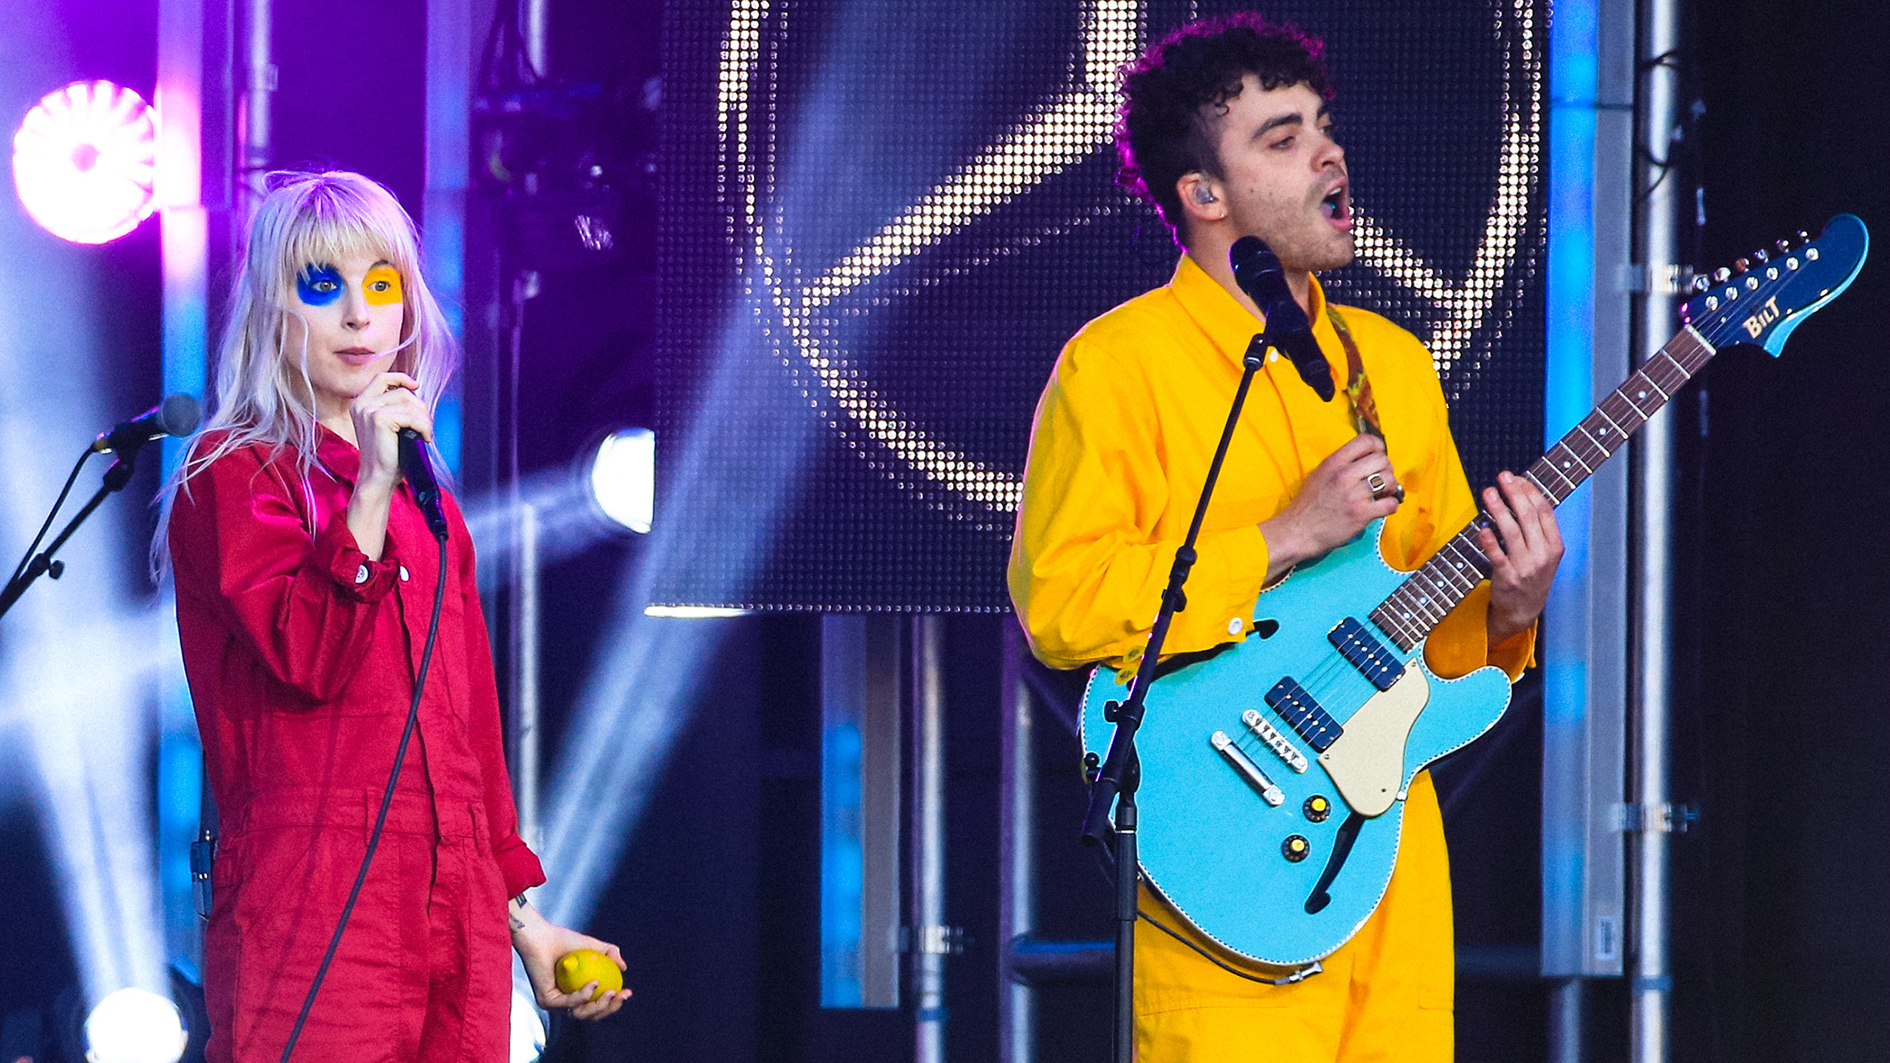 Paramore are working on a new album with “more emphasis on guitar”